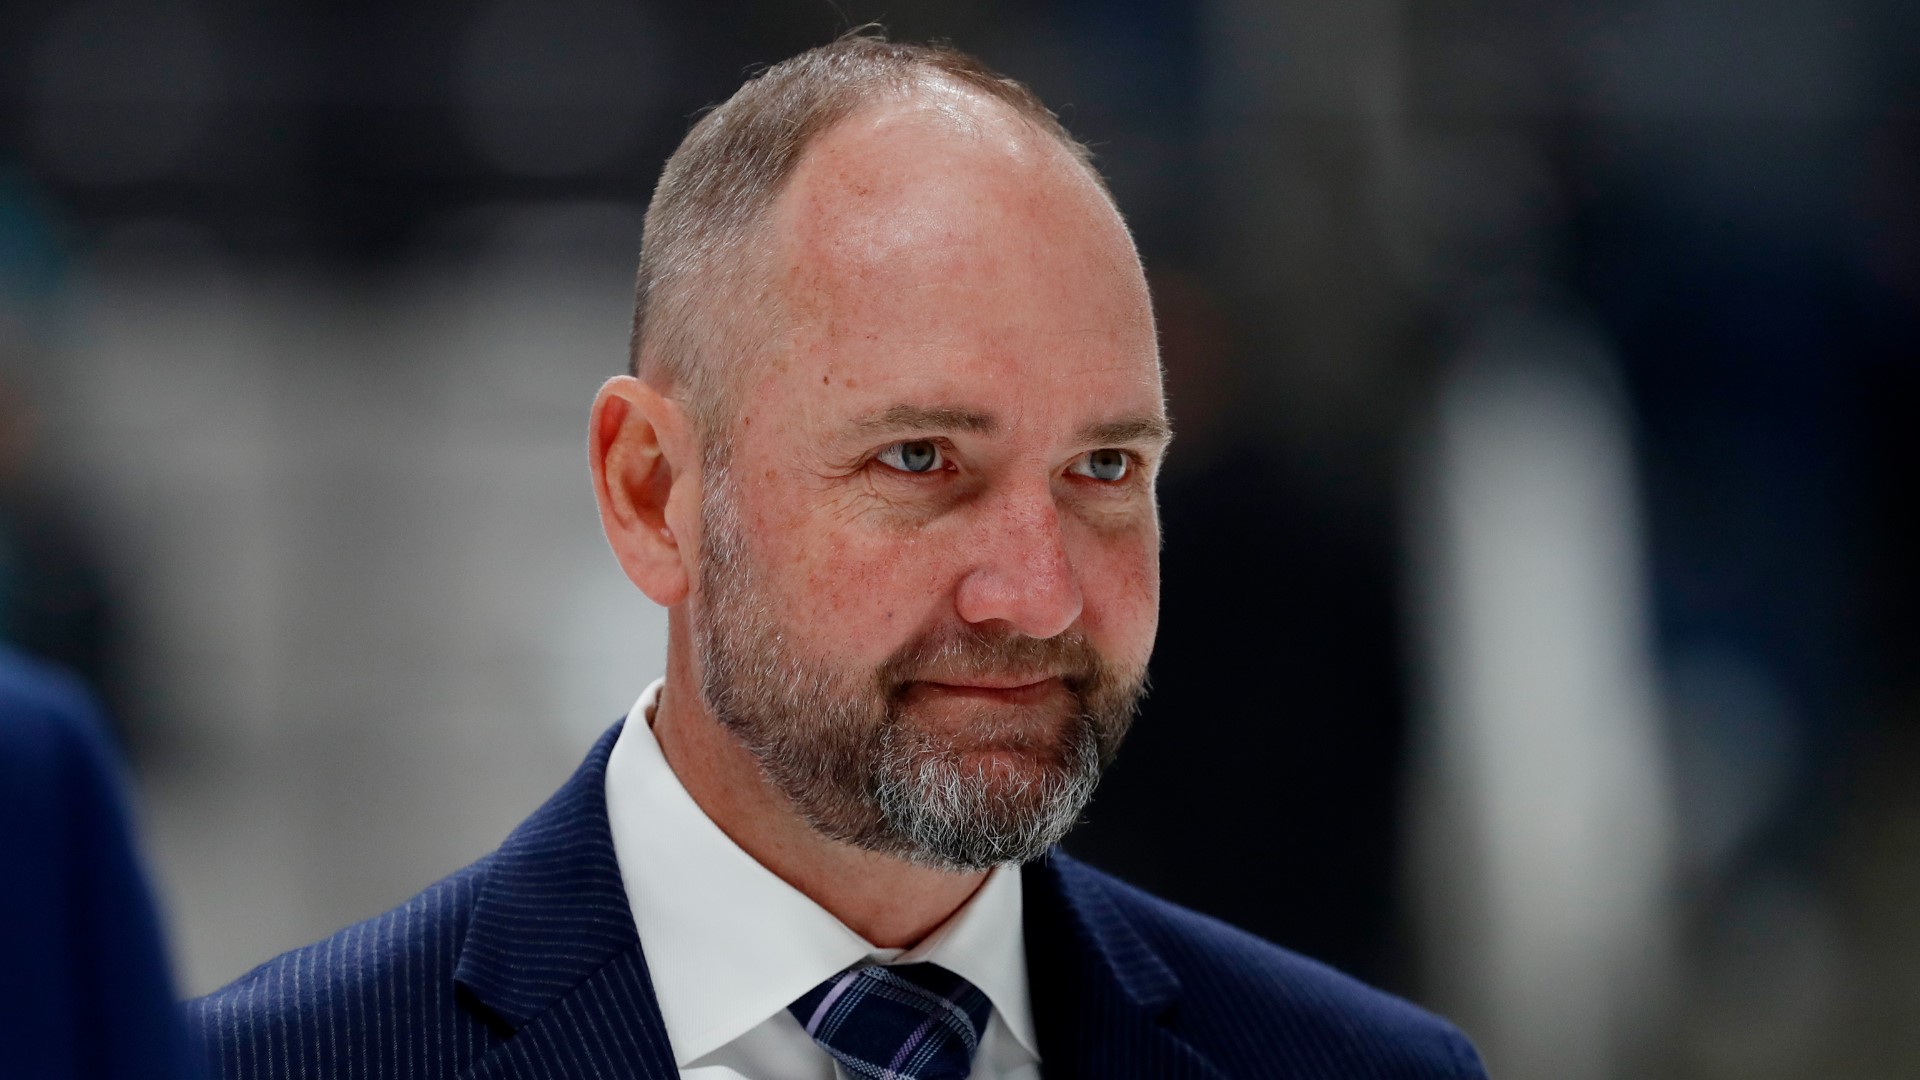 The Canadian sports outlet Sportsnet reported Sunday night that Dallas is planning to hire Peter DeBoer, but team officials say nothing is official yet.